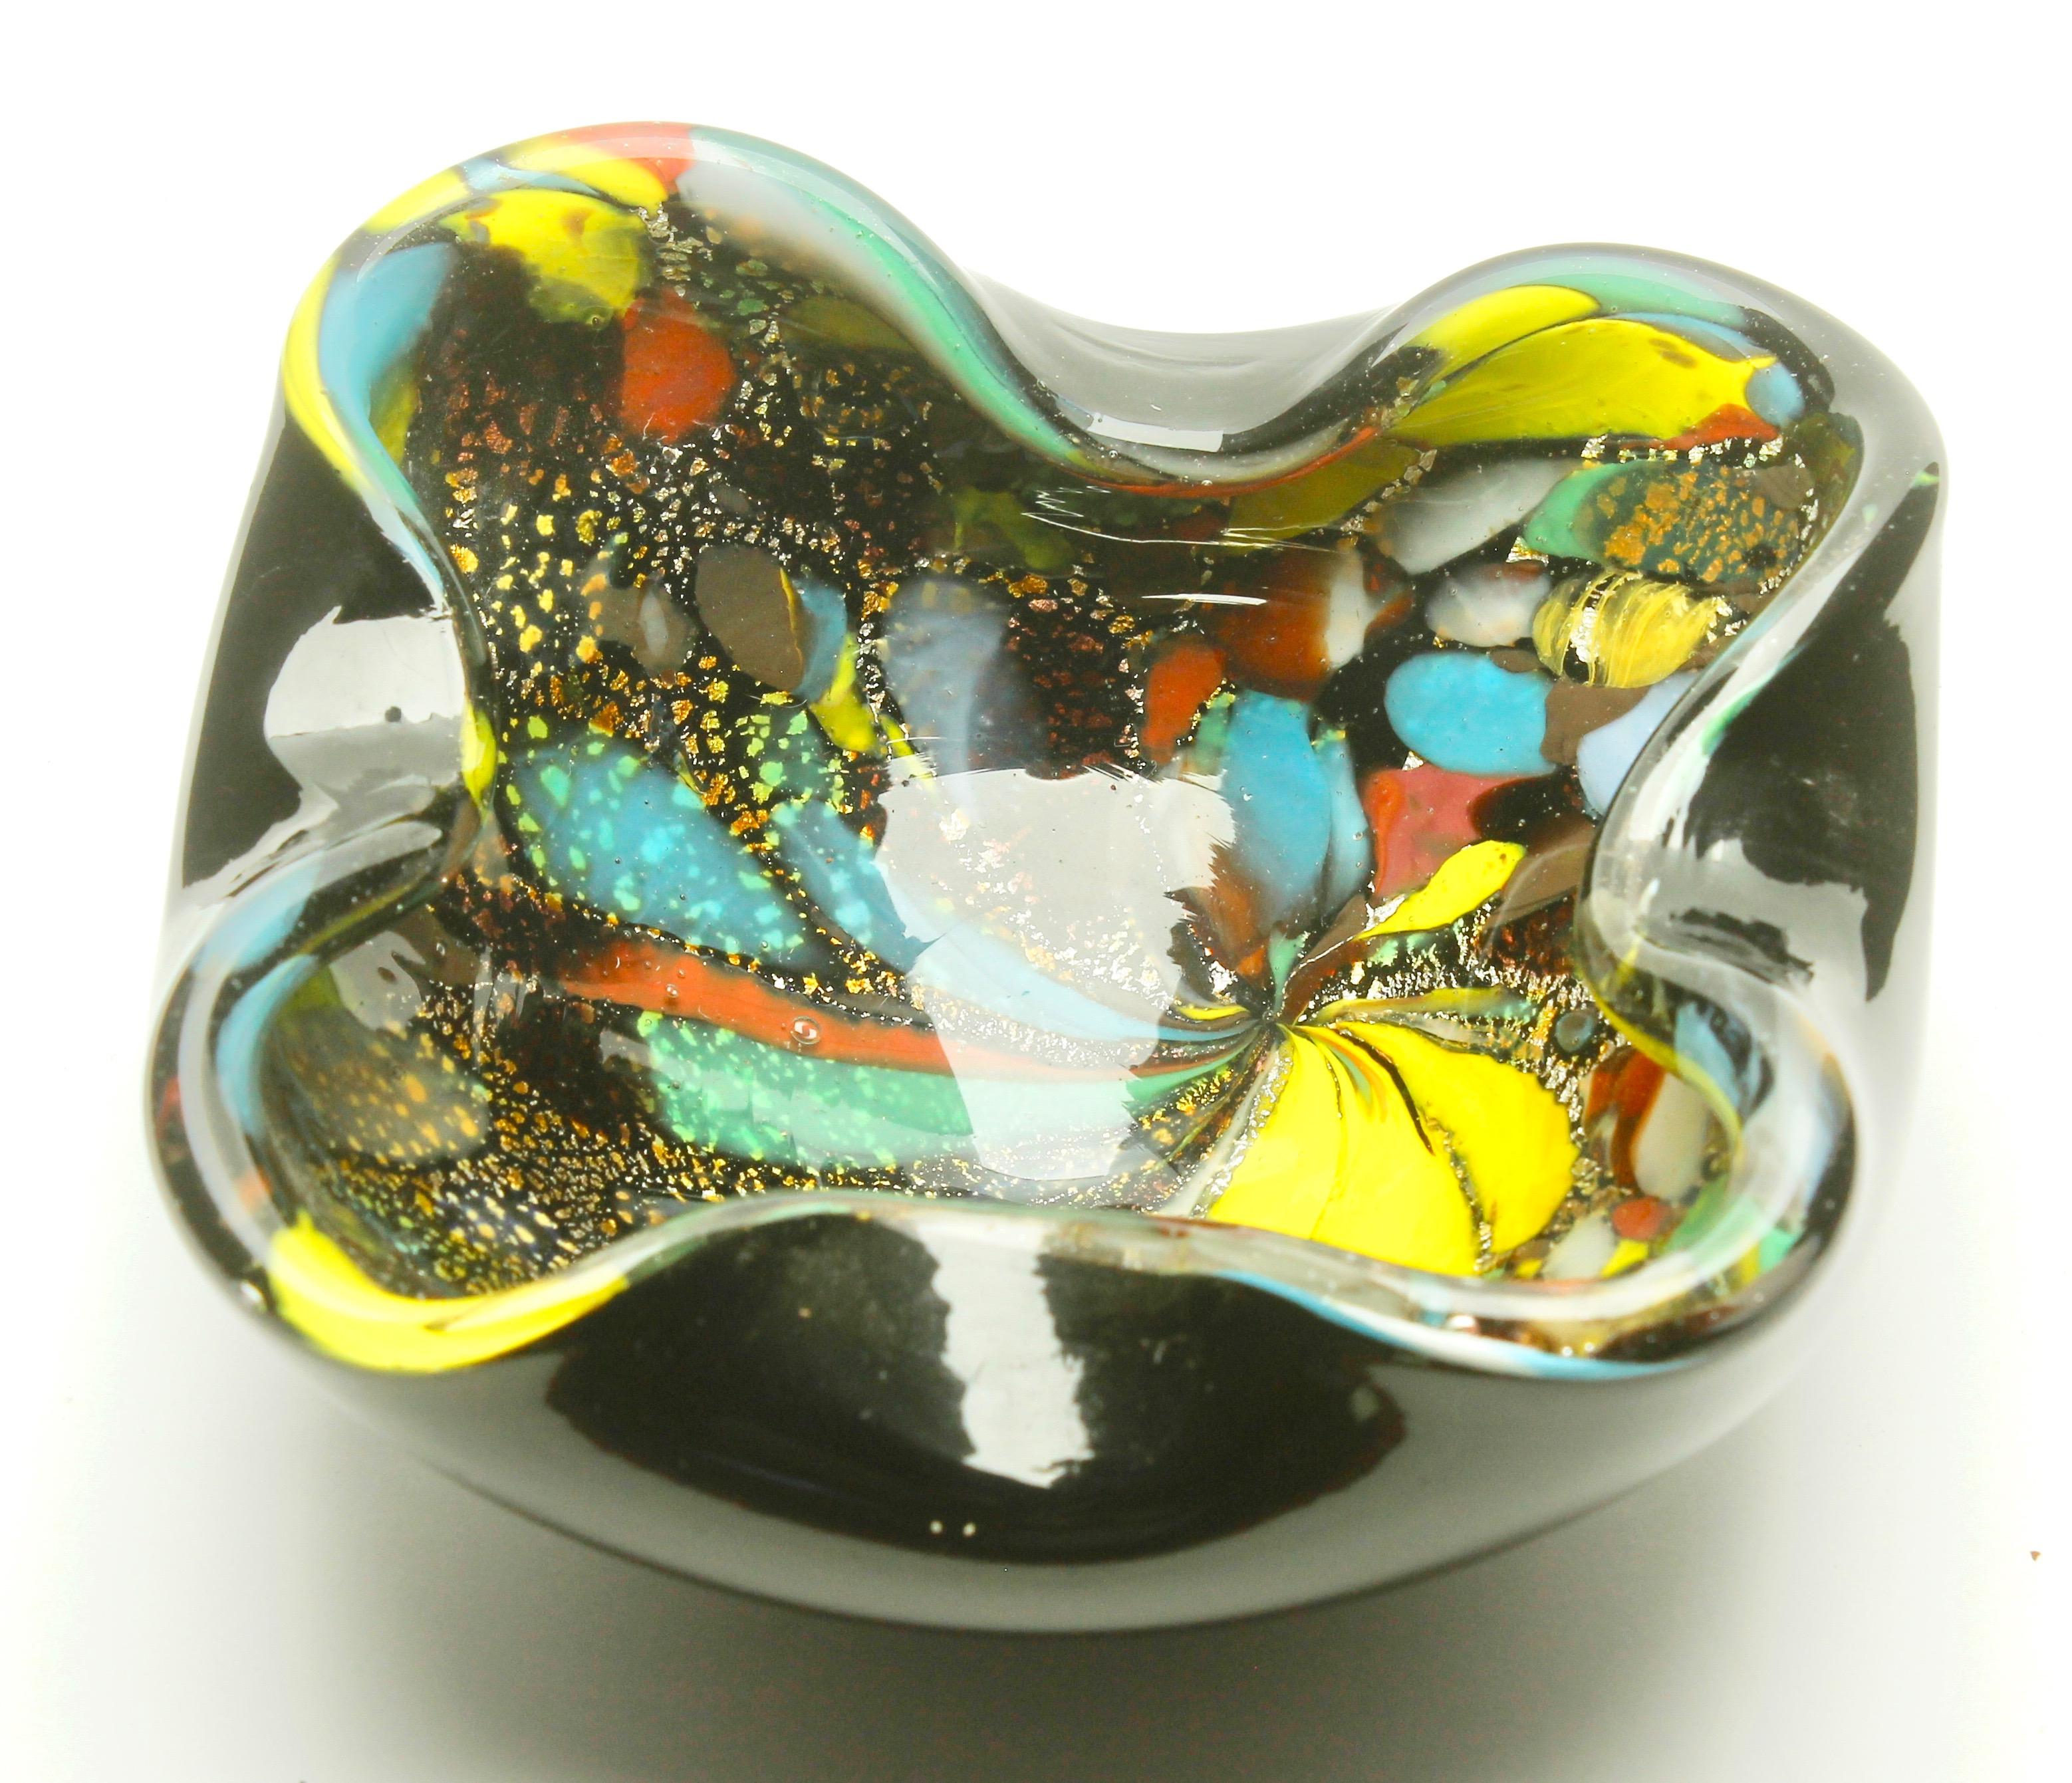 Stylish Murano art glass bowl attributed to AVEM and made in the 1960s. Distinctive black casing on the outside with colorful spatter-glass interior in bright and contrasting colors with silver and copper aventurine inclusions. Polished